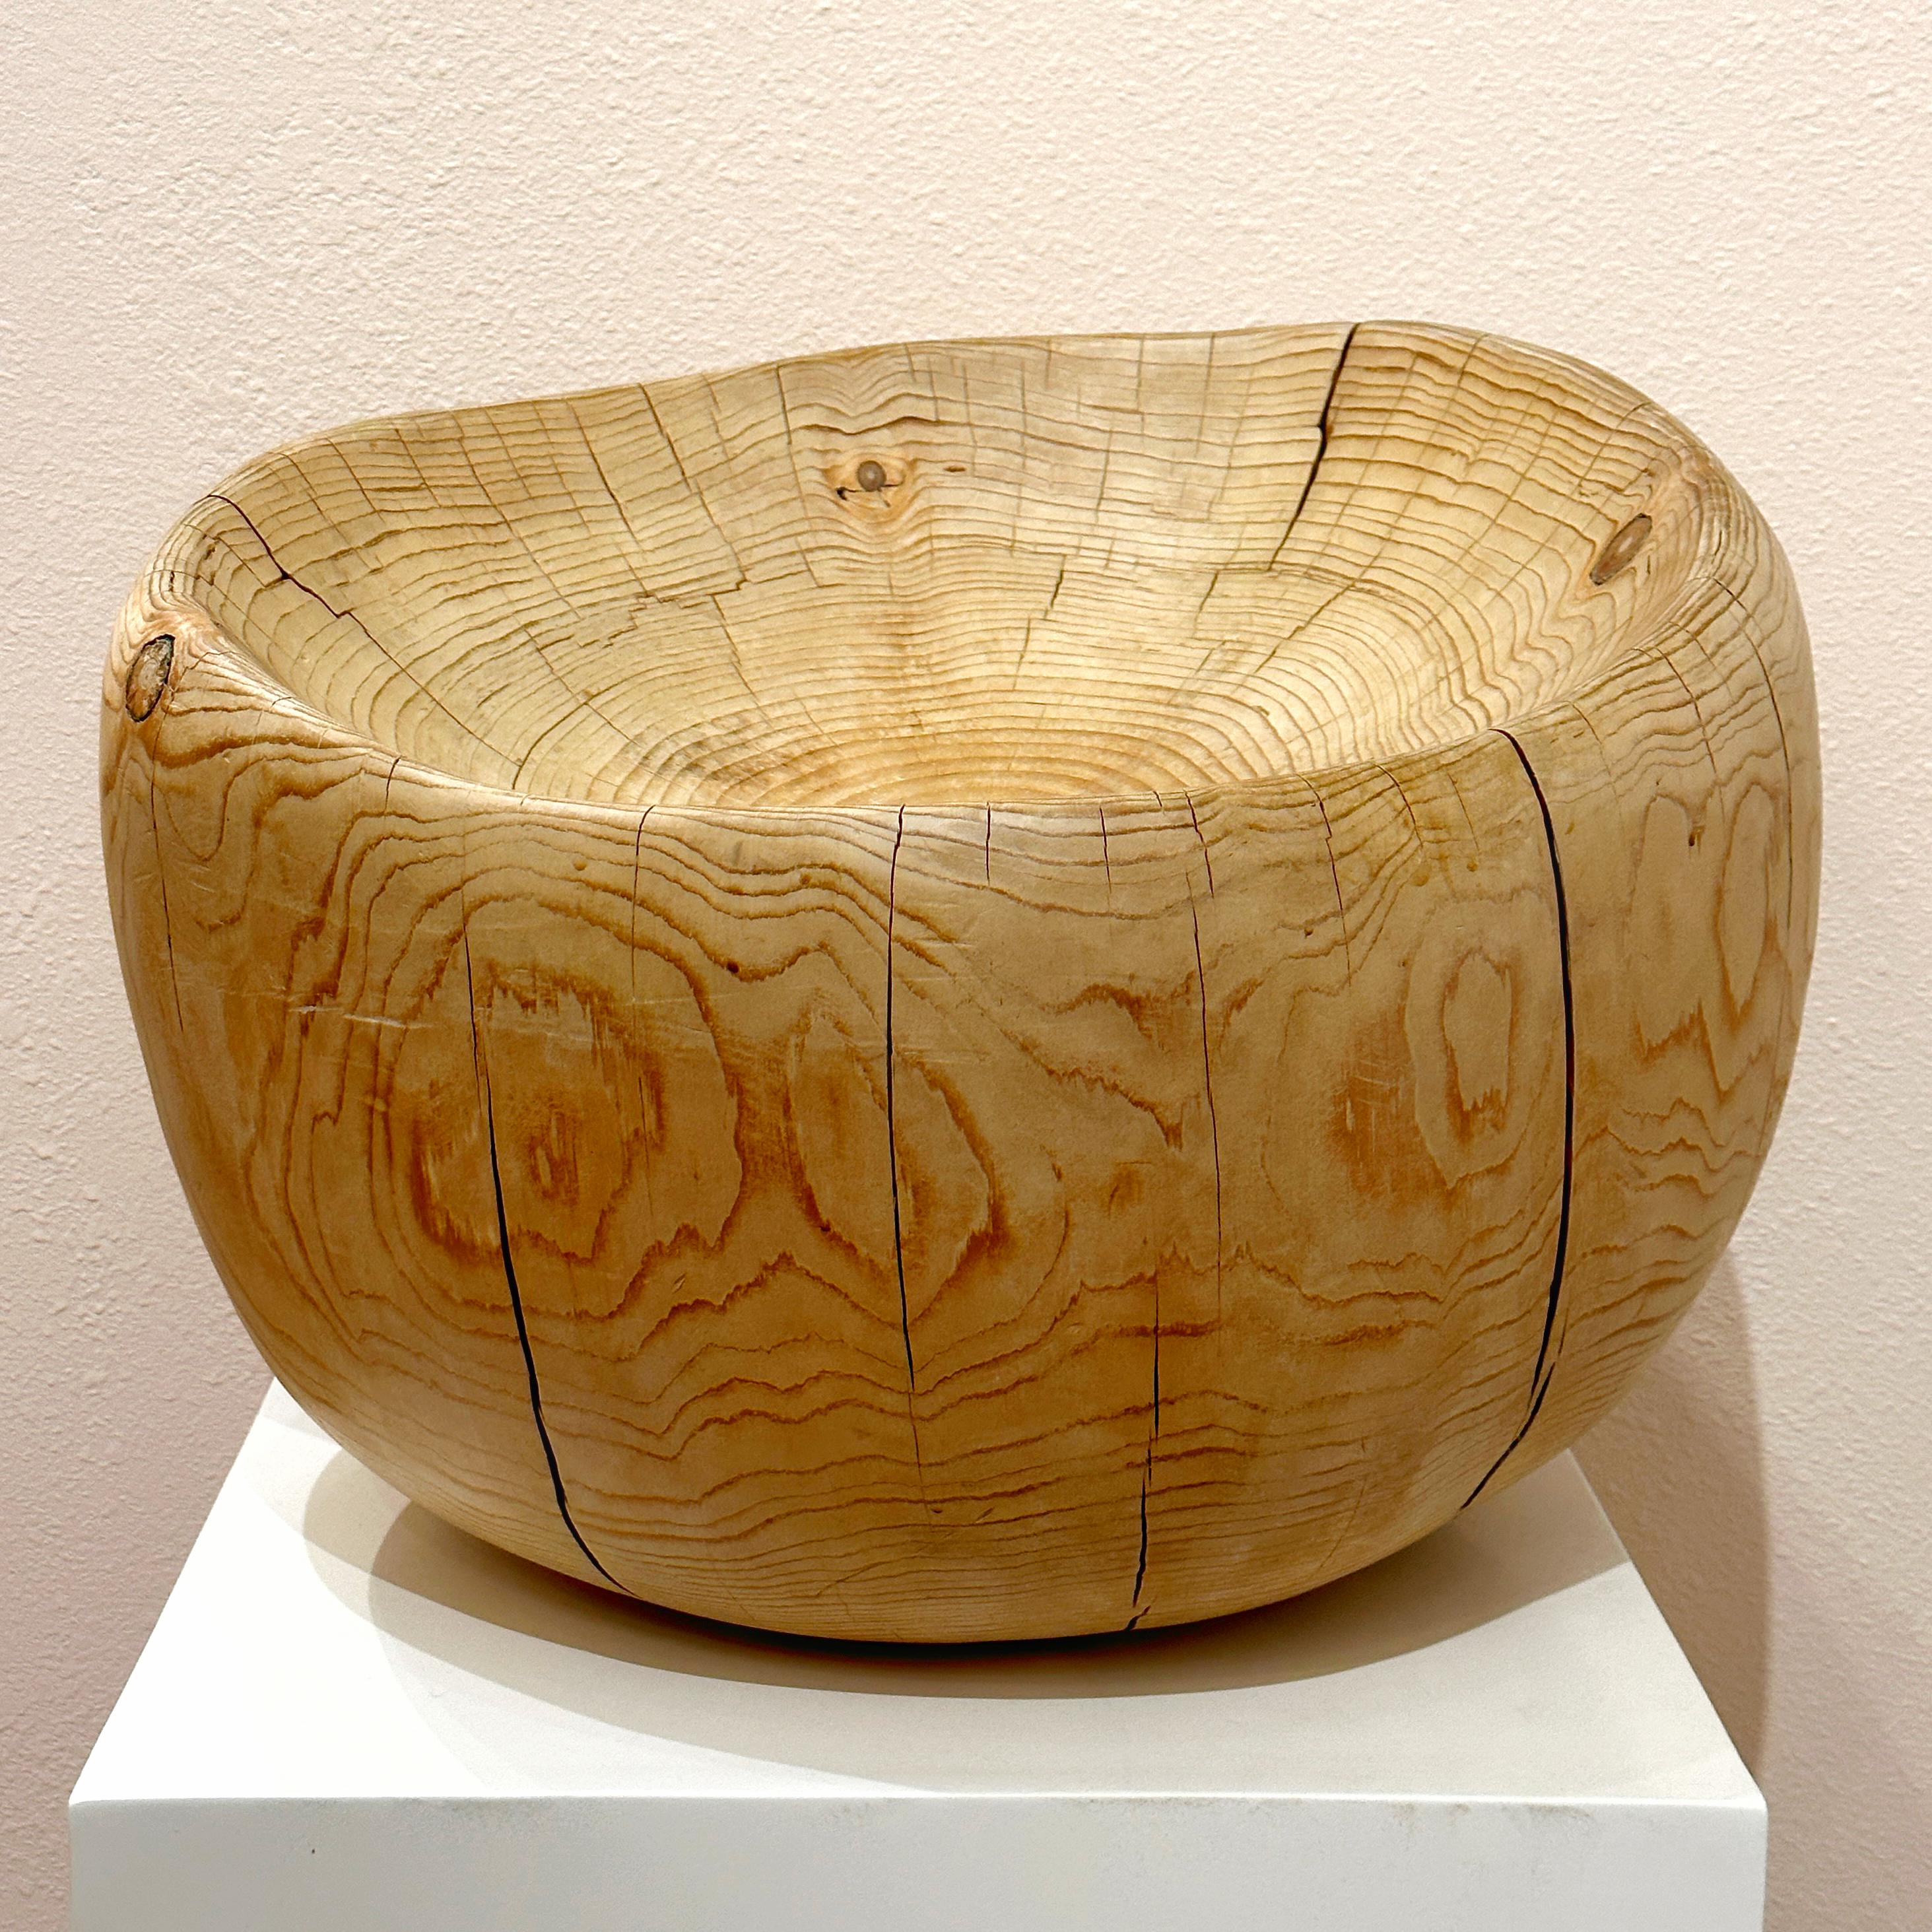 Daniel Pollock organic modern carved wood stool or sculptural object hand carved out of pine wood. This is a very heavy piece and the imperfections only add to its charm and appeal. A beautiful sculpture to place on a pedestal or use as a functional